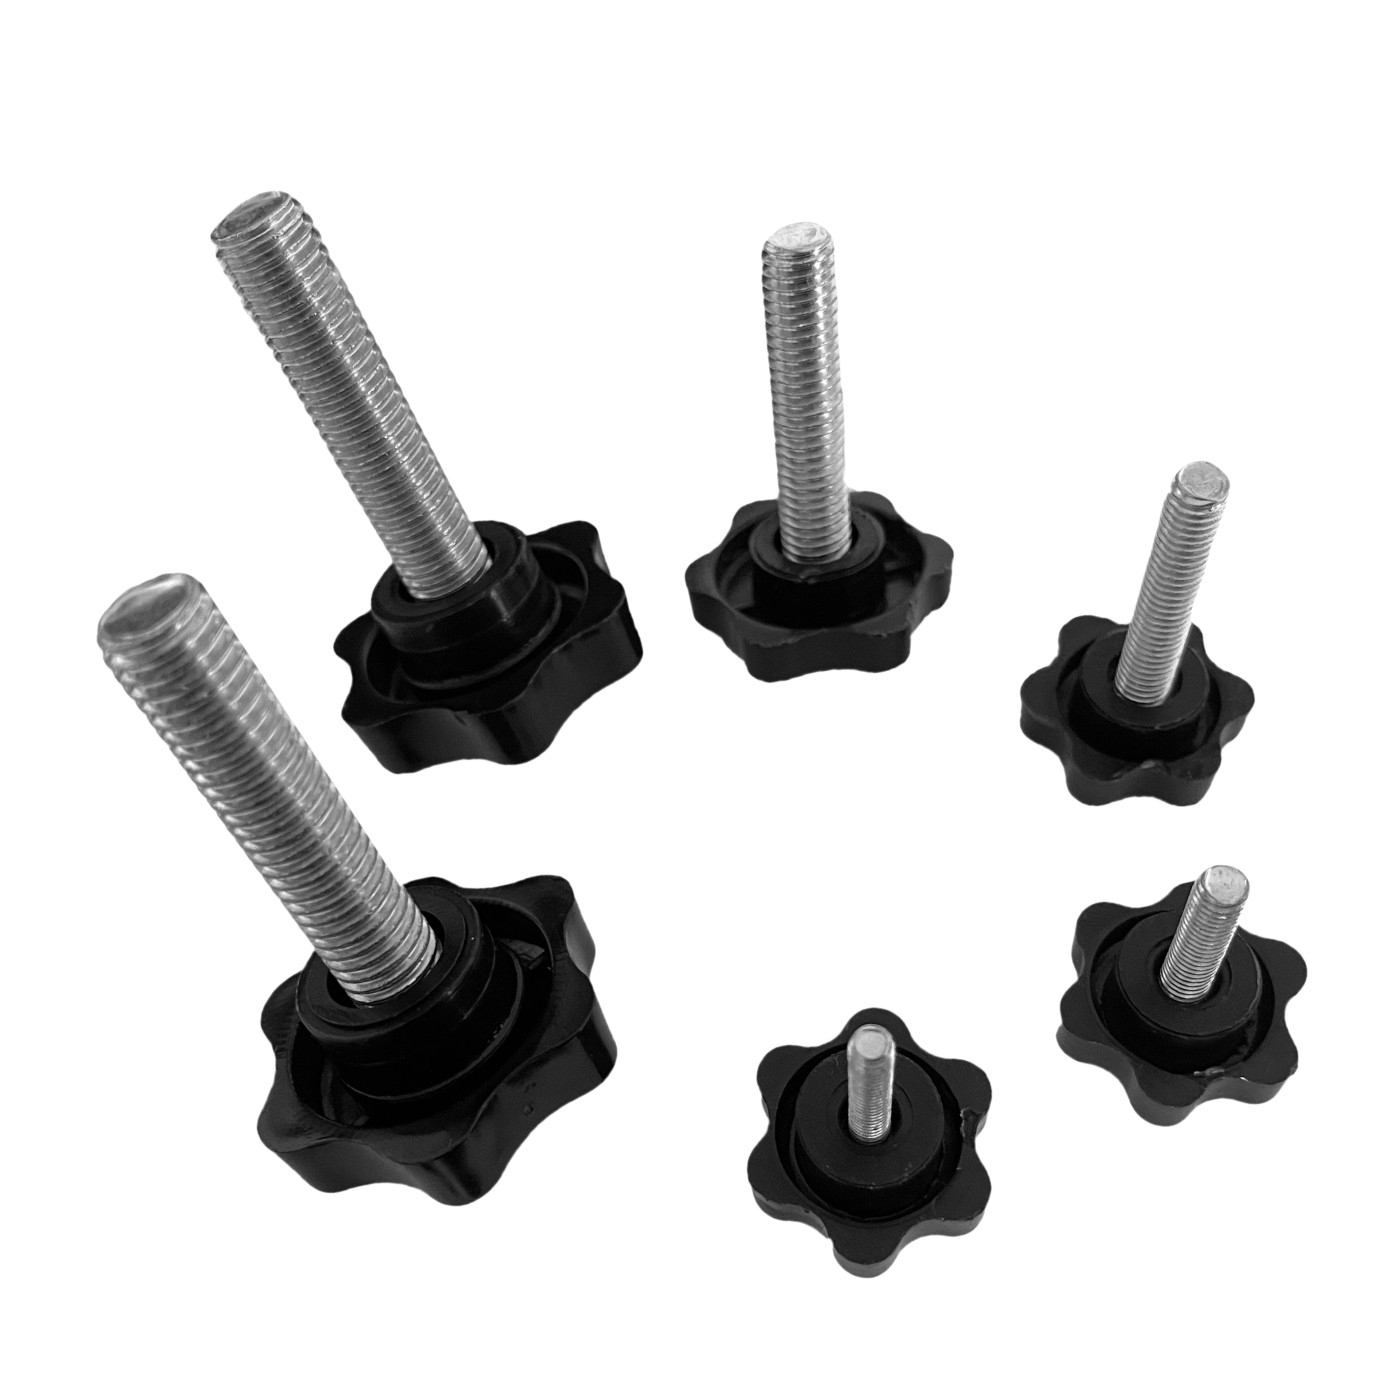 Set of 10 star knobs with threaded rod (M10, black)